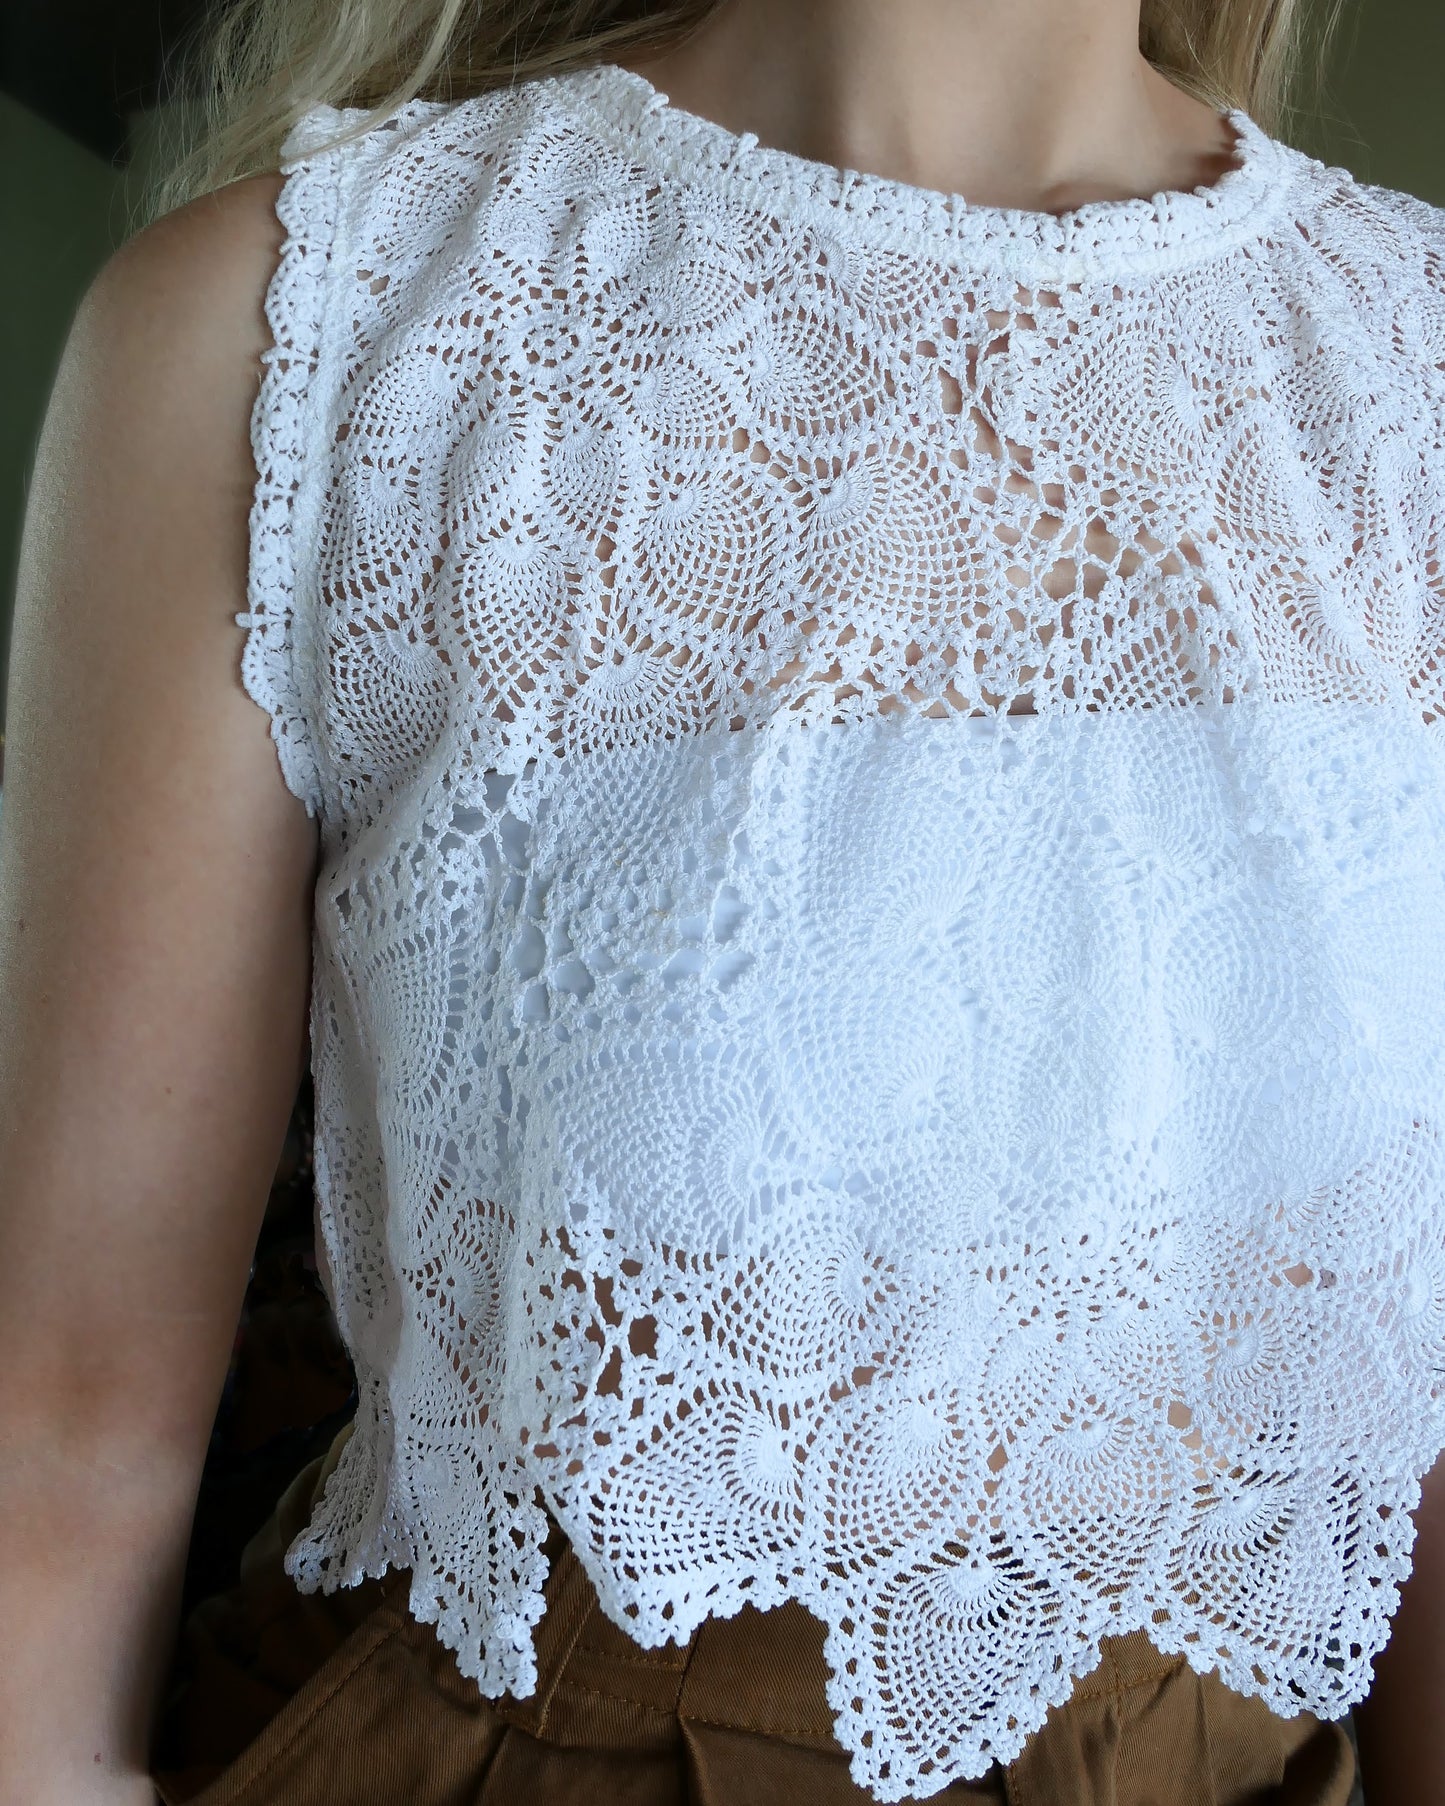 An ultra casual, hip, and boho-chic crop tank top made with interconnected flower doilies reminiscent of the white lotus, which symbolizes peace, tranquility, and calmness. Lace trim at the collar and sleeve. Model is wearing a white colored crochet Lim's Vintage top.